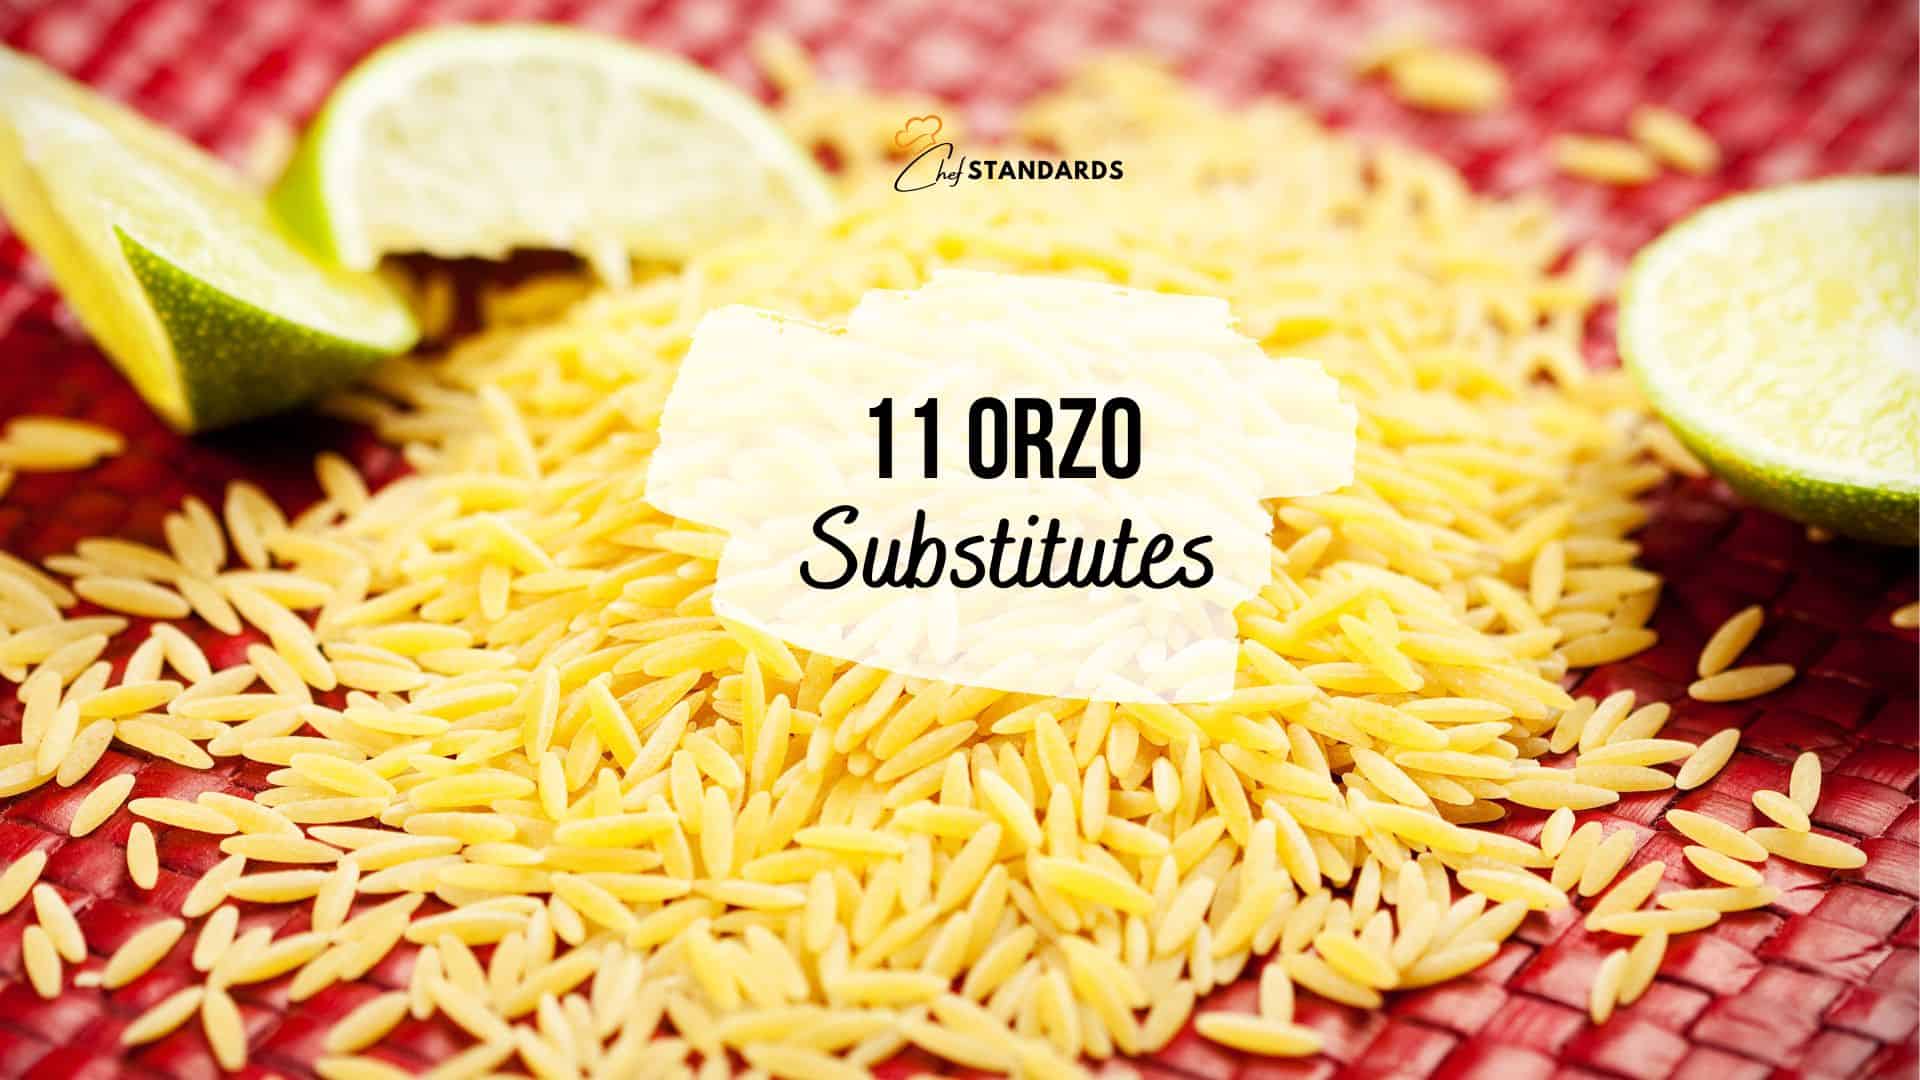 11 Orzo Substitutes